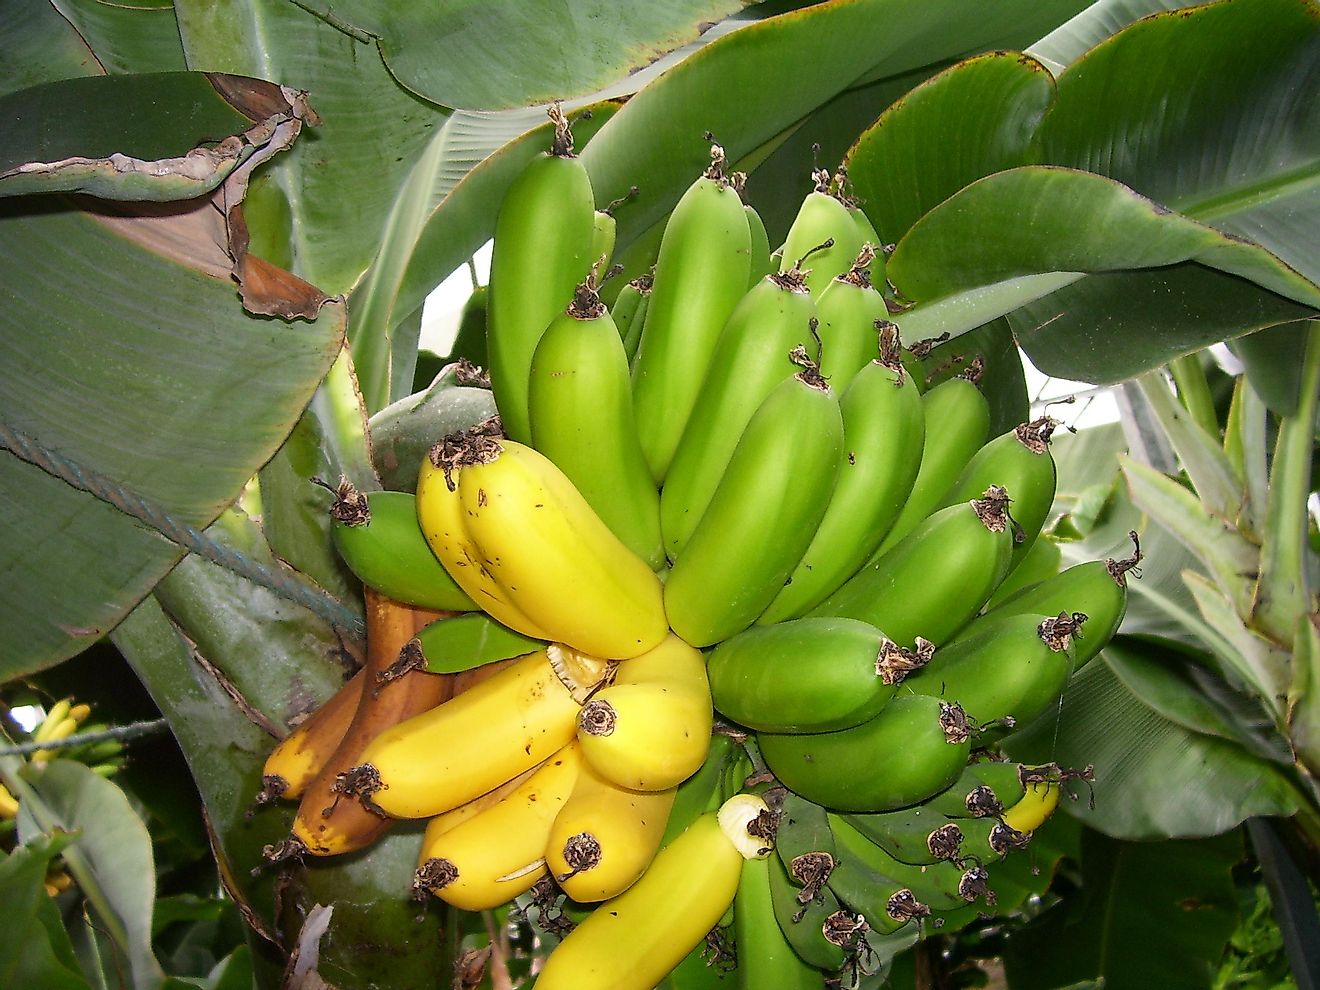 Banana cultivation requires fertile soil and a warm, humid climate.